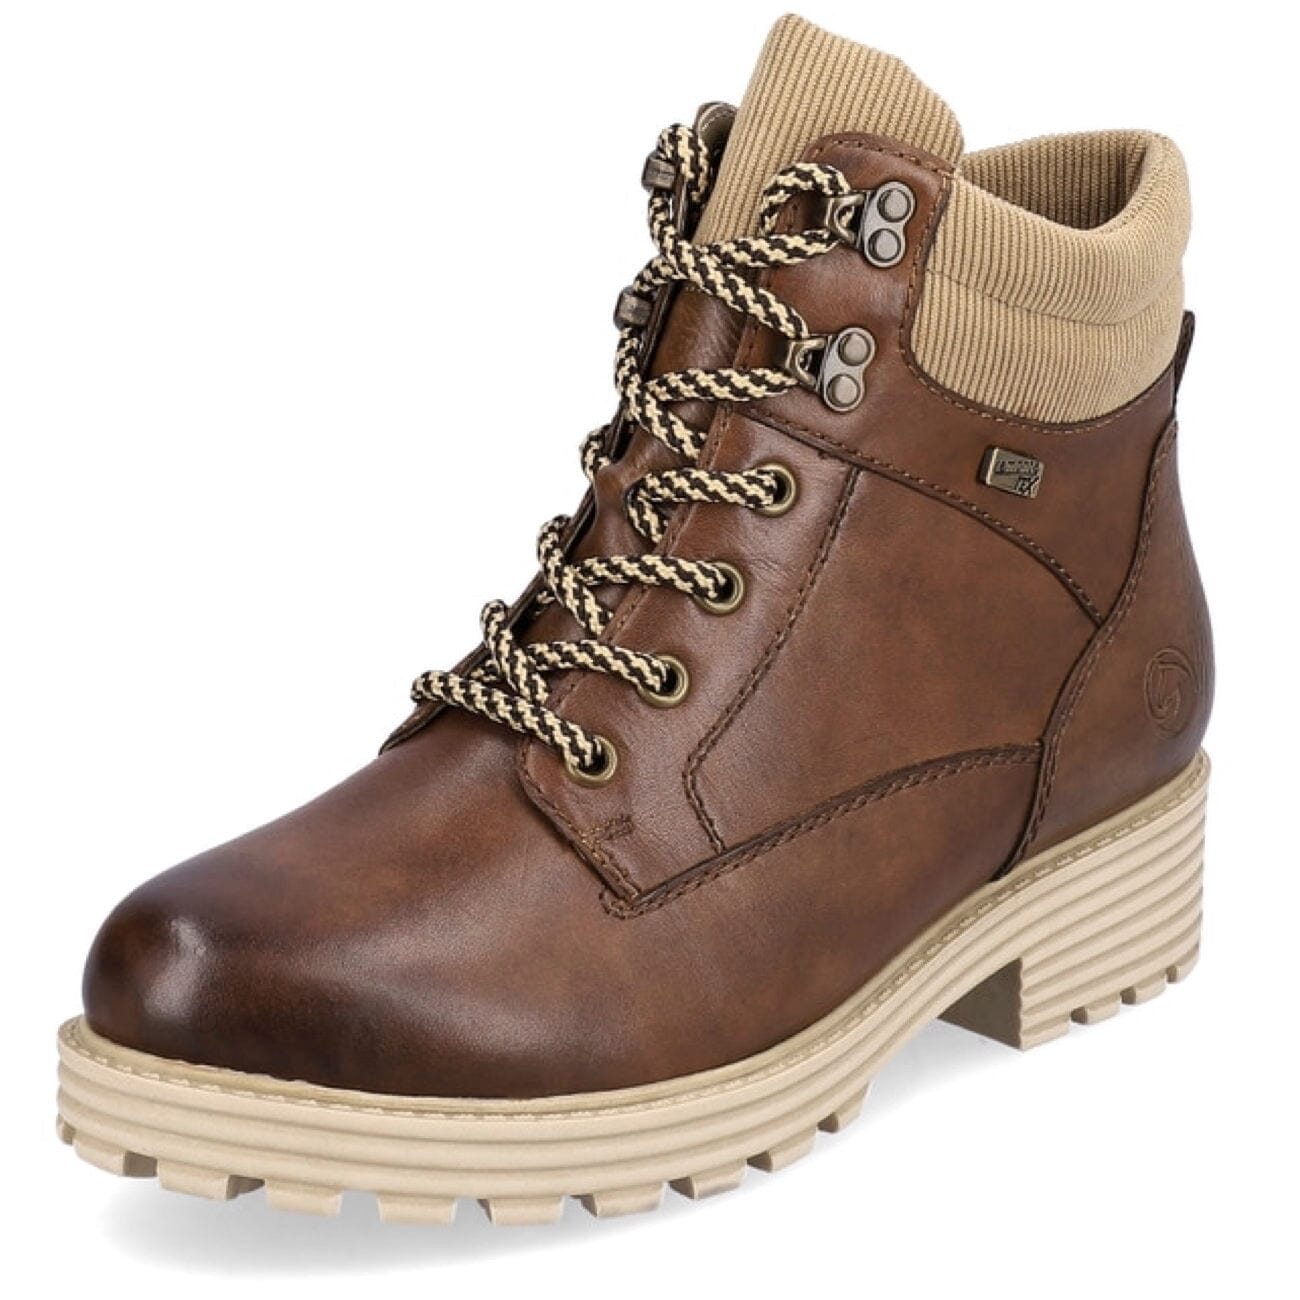 Remonte, DOW75-22, Boot, Leather, Chestnut Boots Remonte Chestnut 37 